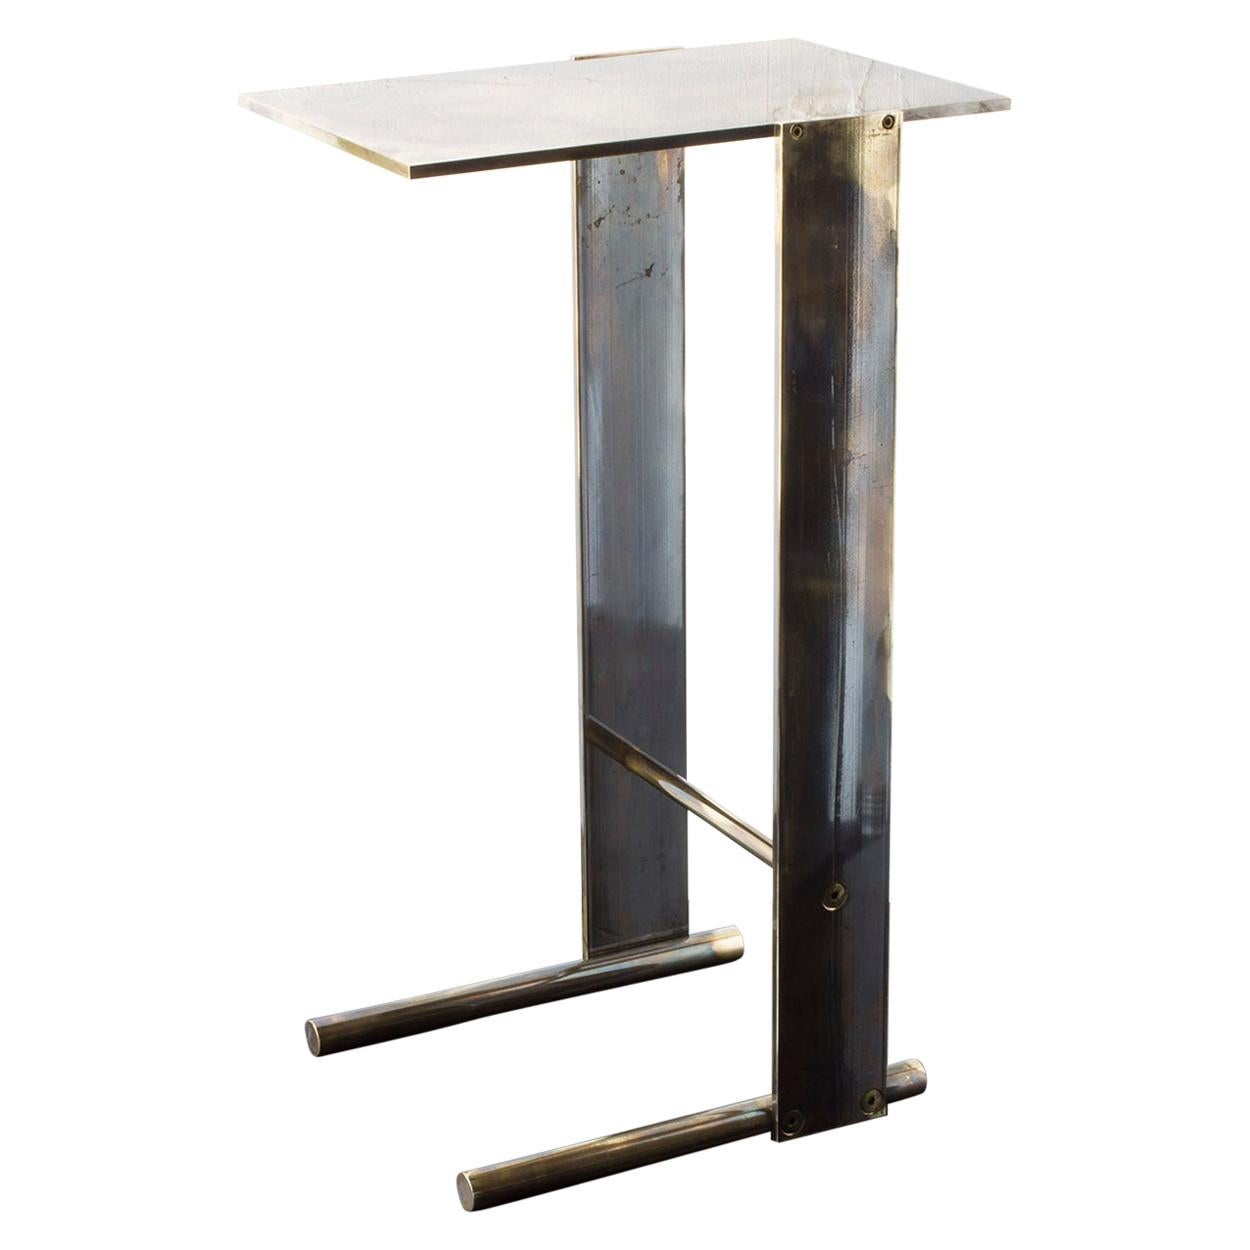 Untitled Side Table 1.0 "Smoke" Patinated Brass Small Accent, End or Drink Stand